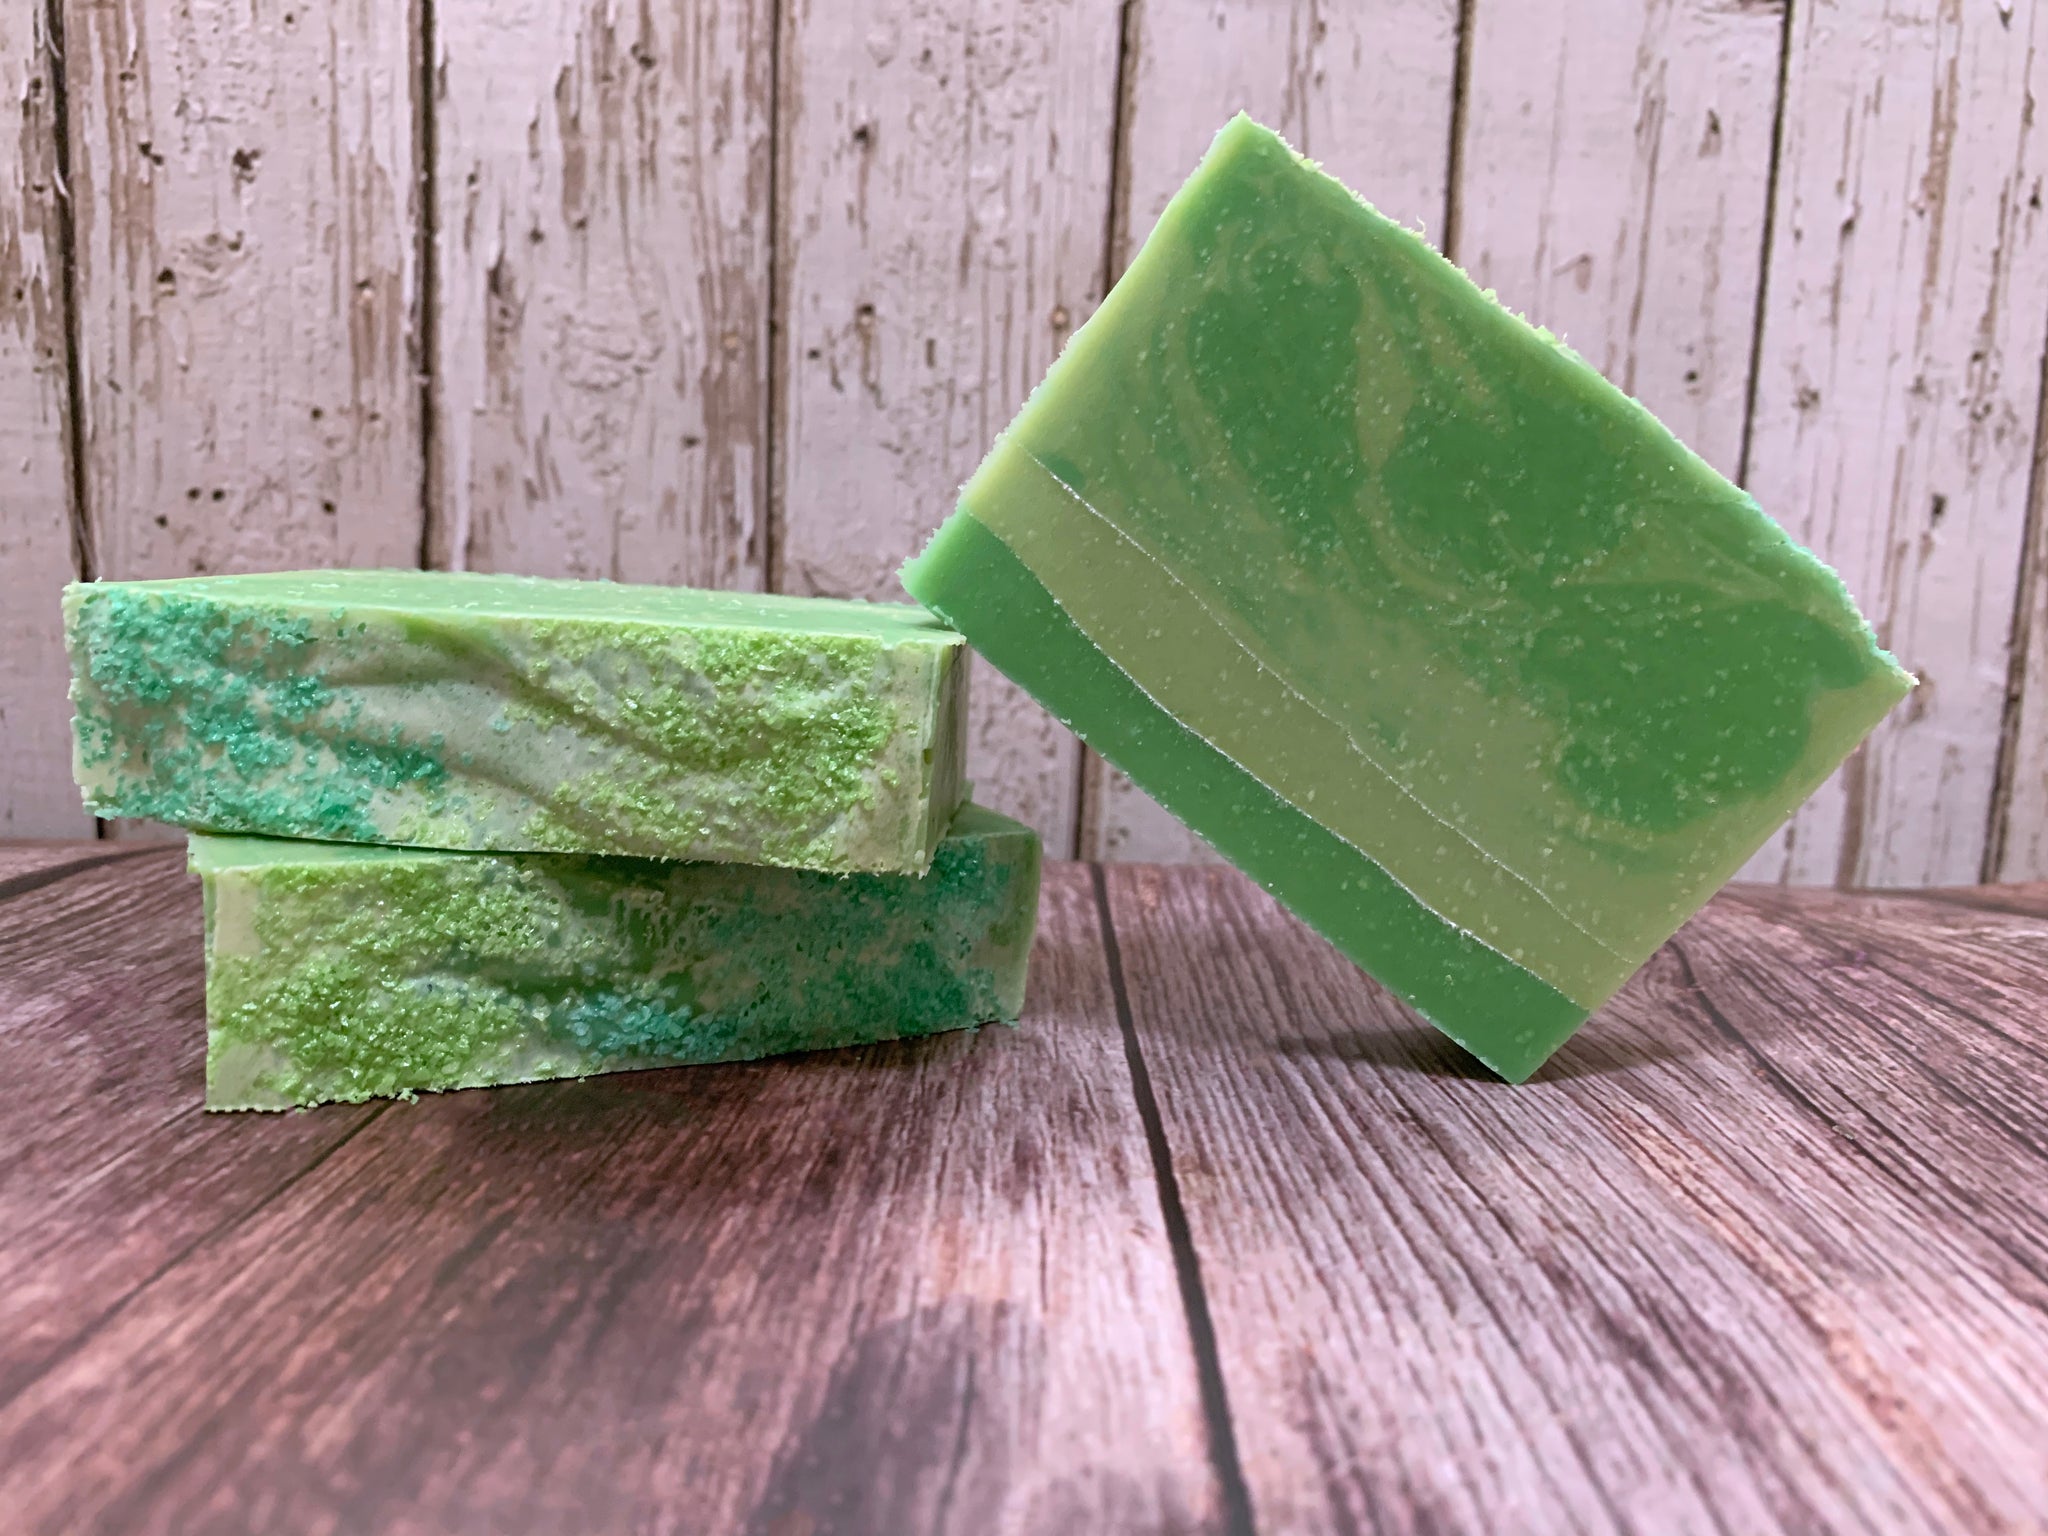 green beer soap handmade in texas with squeeze & twist ipa from no label brewing company texas craft brewery tropical beer soap spunkndisorderly